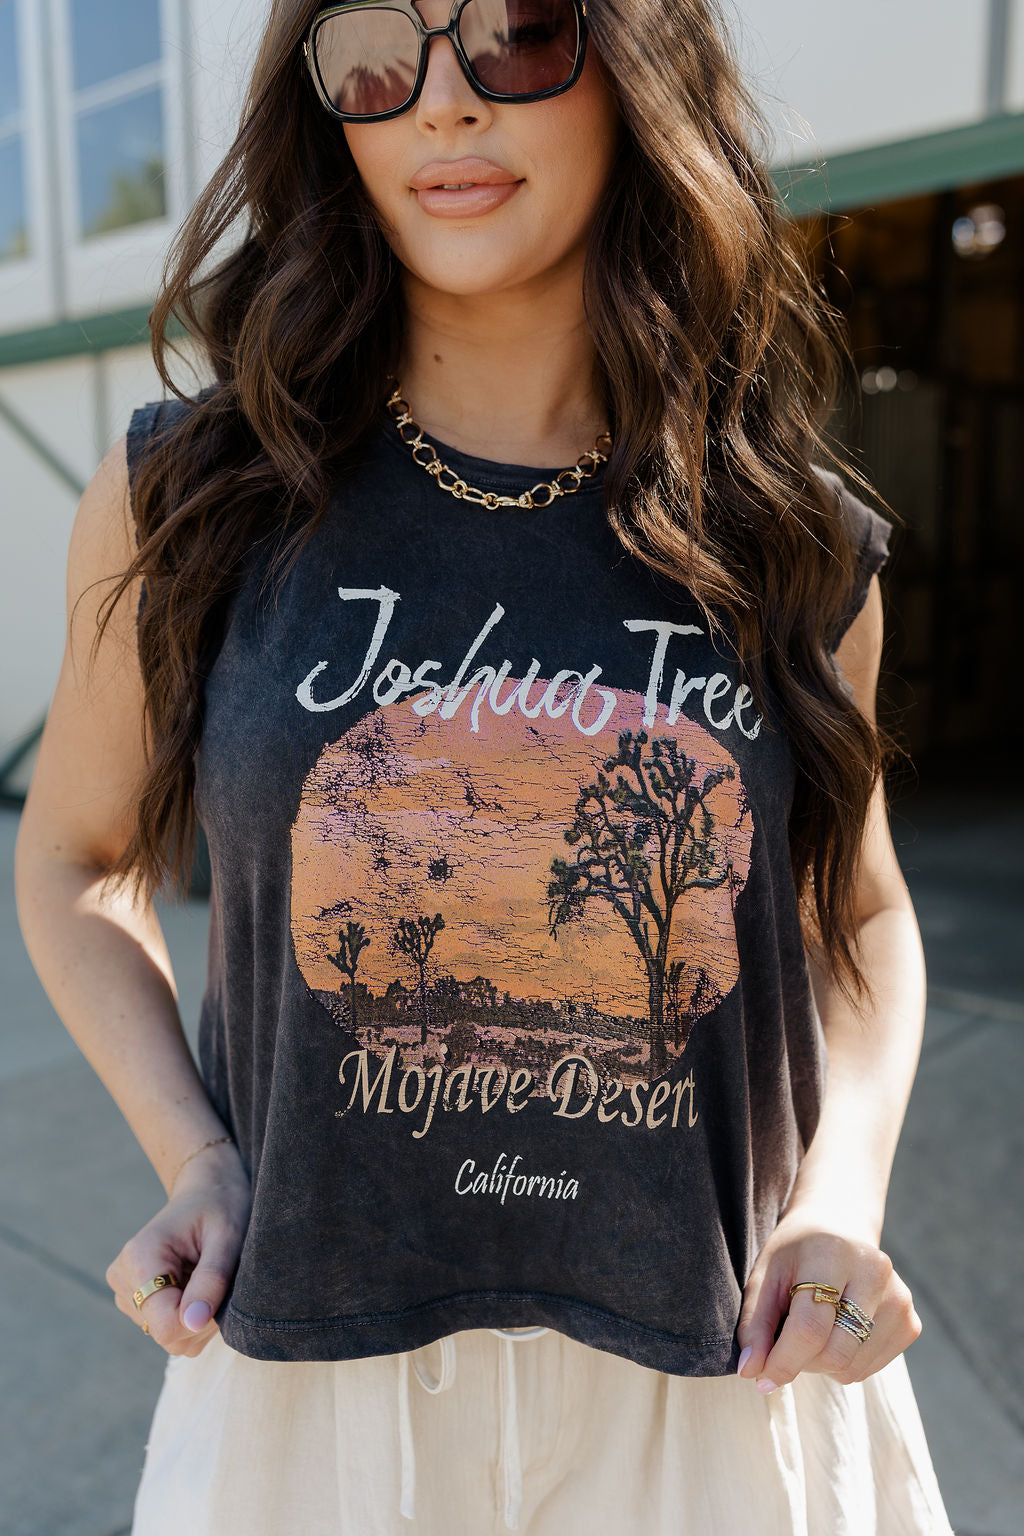 Front upper body view of female model wearing the Joshua Tree Charcoal Grey Graphic Tee that has distressed charcoal grey fabric, a round neck, and is sleeveless. Features a circular sunset desert graphic with text that says "Joshua Tree Mojave Desert California"